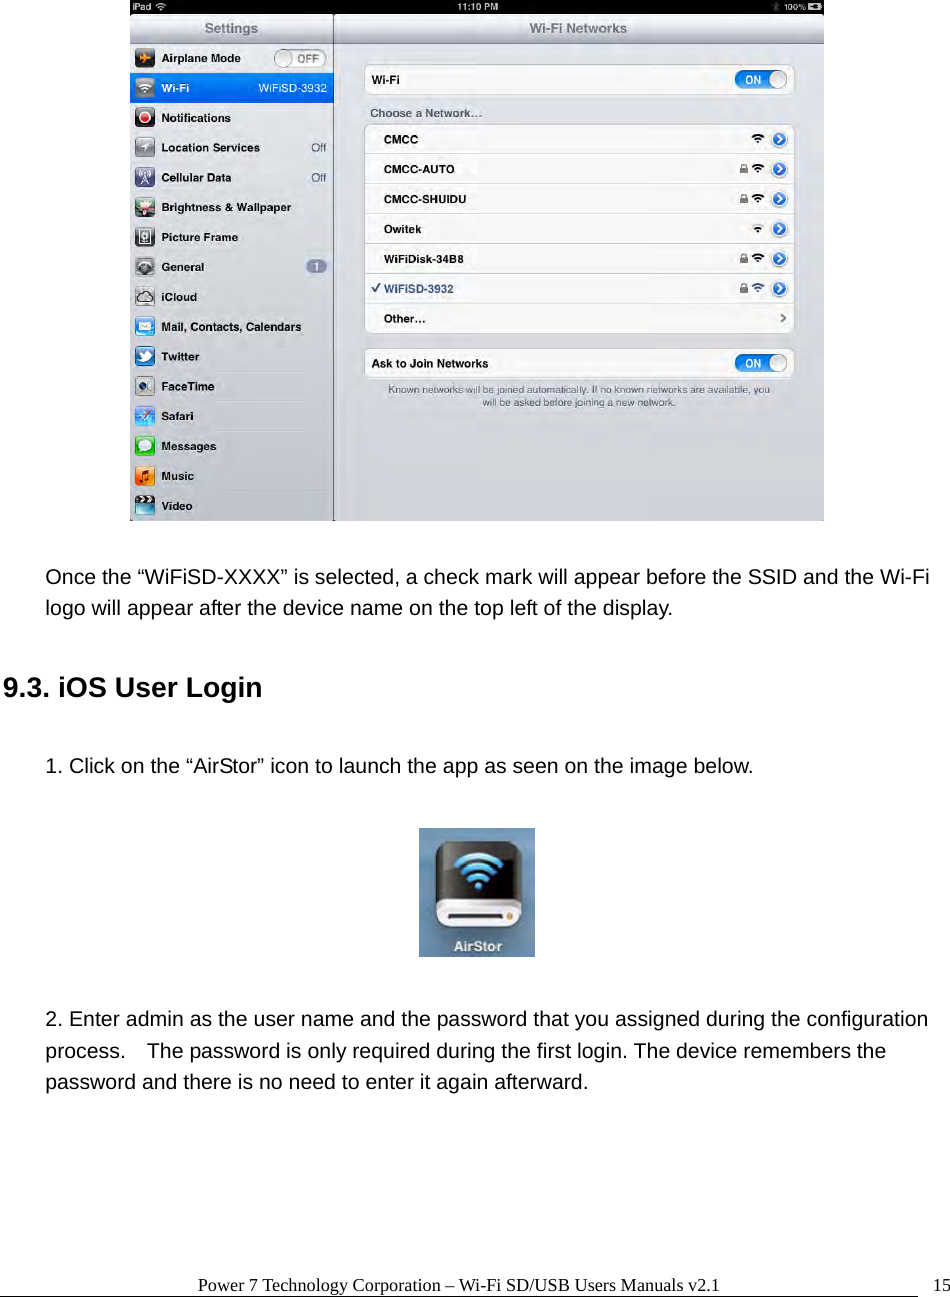 Power 7 Technology Corporation – Wi-Fi SD/USB Users Manuals v2.1  15   Once the “WiFiSD-XXXX” is selected, a check mark will appear before the SSID and the Wi-Fi logo will appear after the device name on the top left of the display.  9.3. iOS User Login  1. Click on the “AirStor” icon to launch the app as seen on the image below.    2. Enter admin as the user name and the password that you assigned during the configuration process.    The password is only required during the first login. The device remembers the password and there is no need to enter it again afterward.  